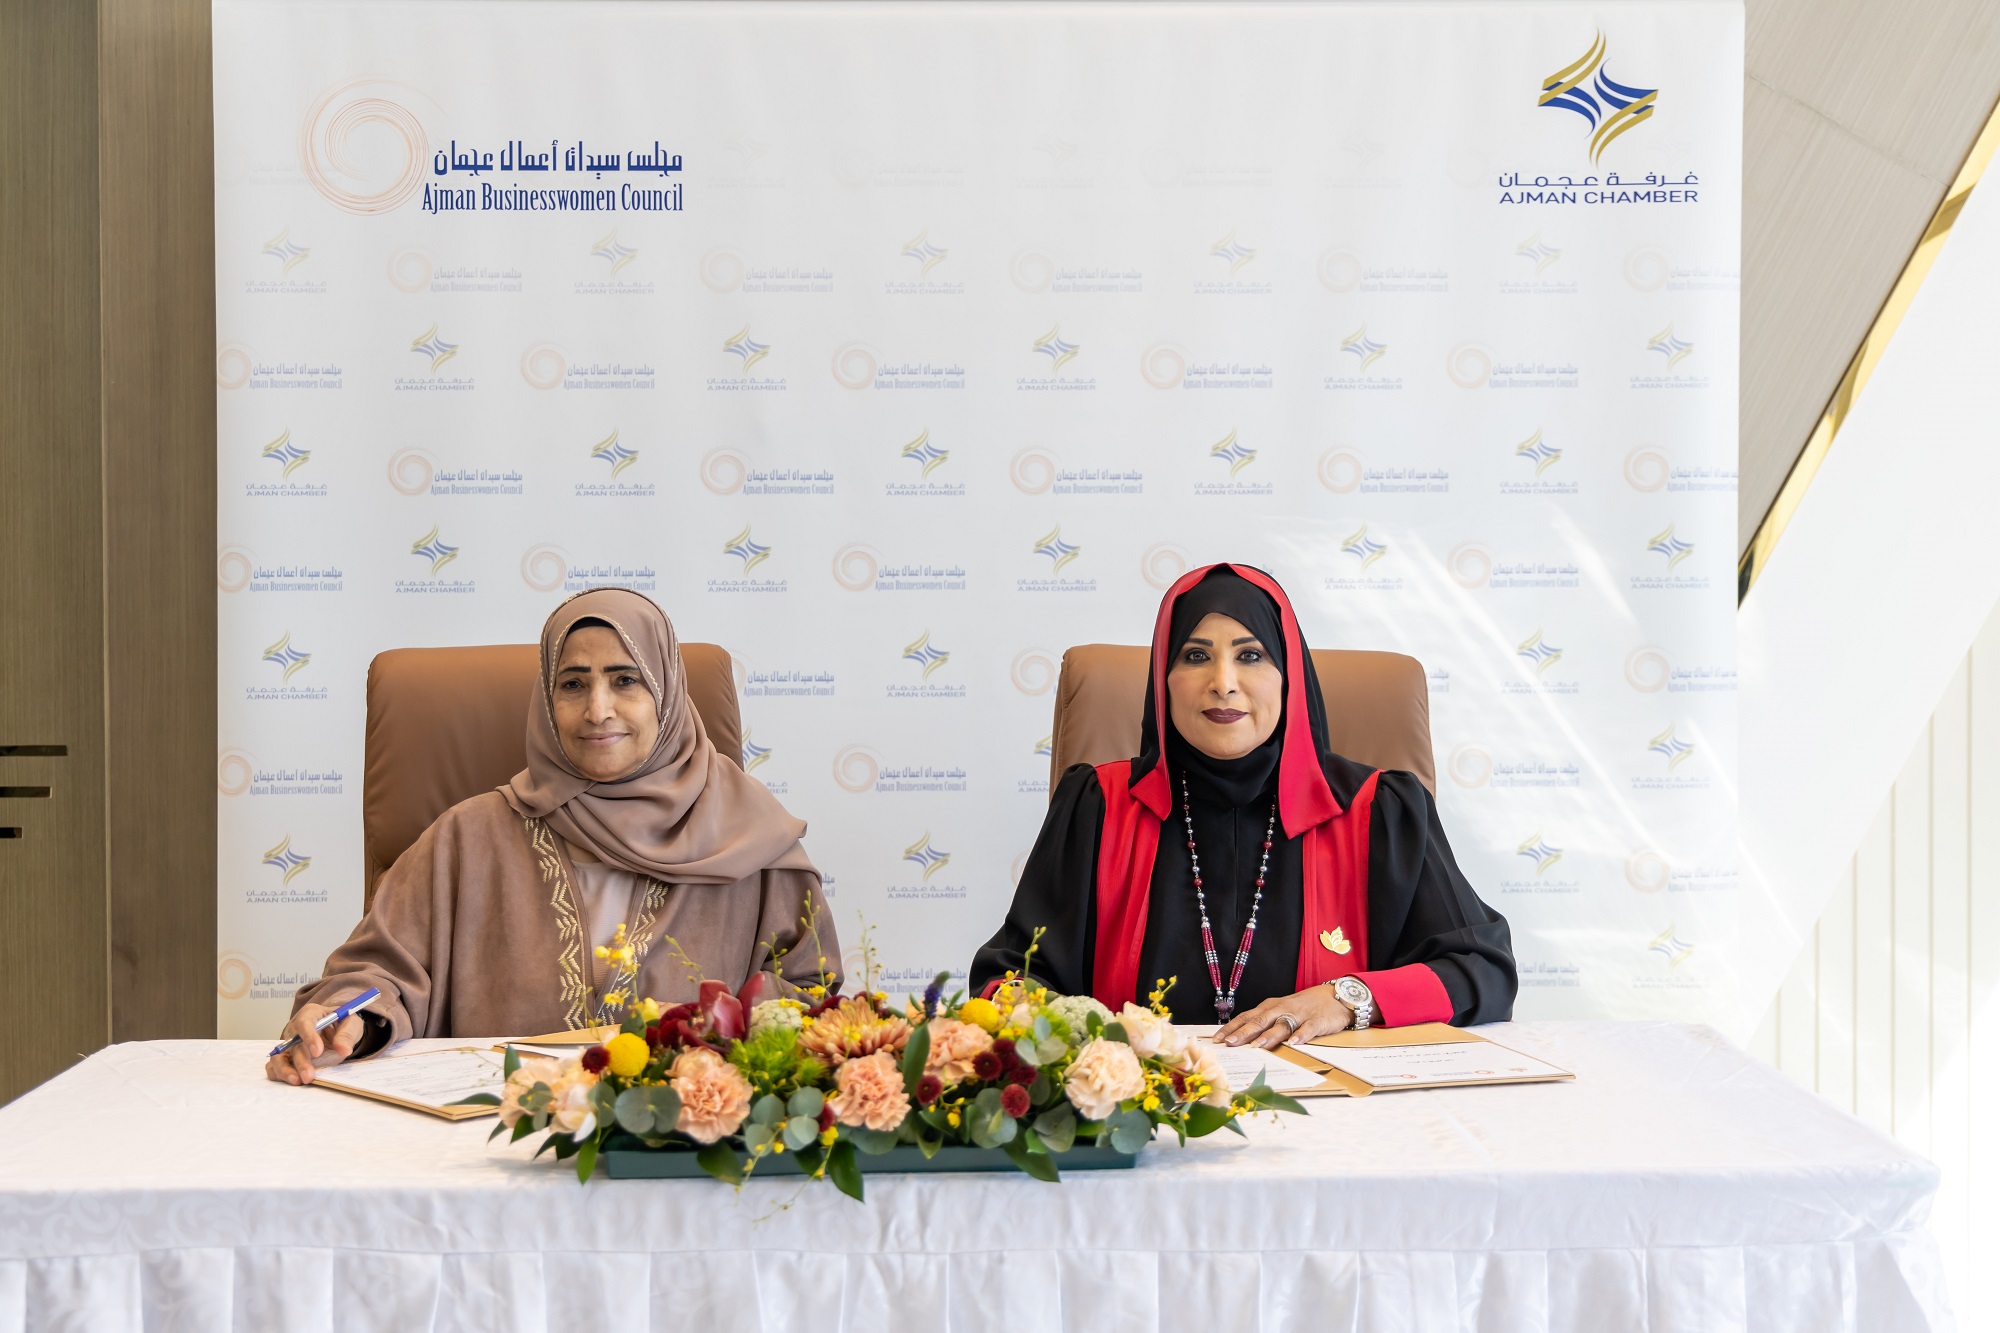 Ajbwc Signed A Mou With The Emirates Association Of Women Entrepreneurs